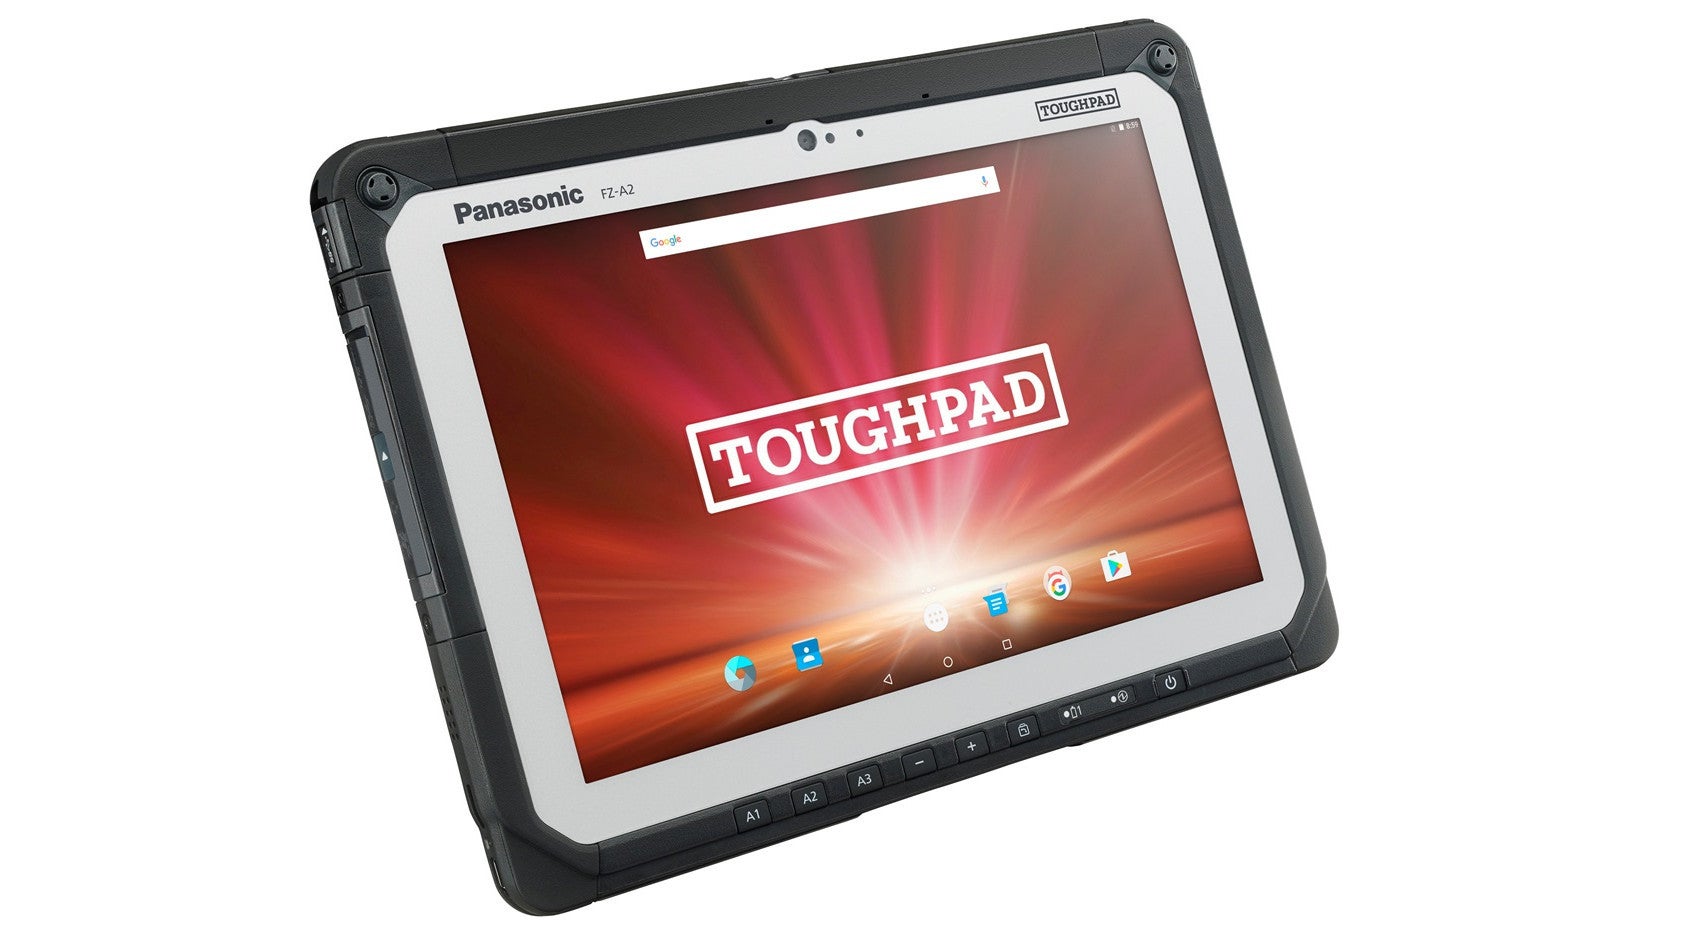 Panasonic launches the Toughpad FZ-A2 rugged Android tablet in the US, it costs more than $2,000